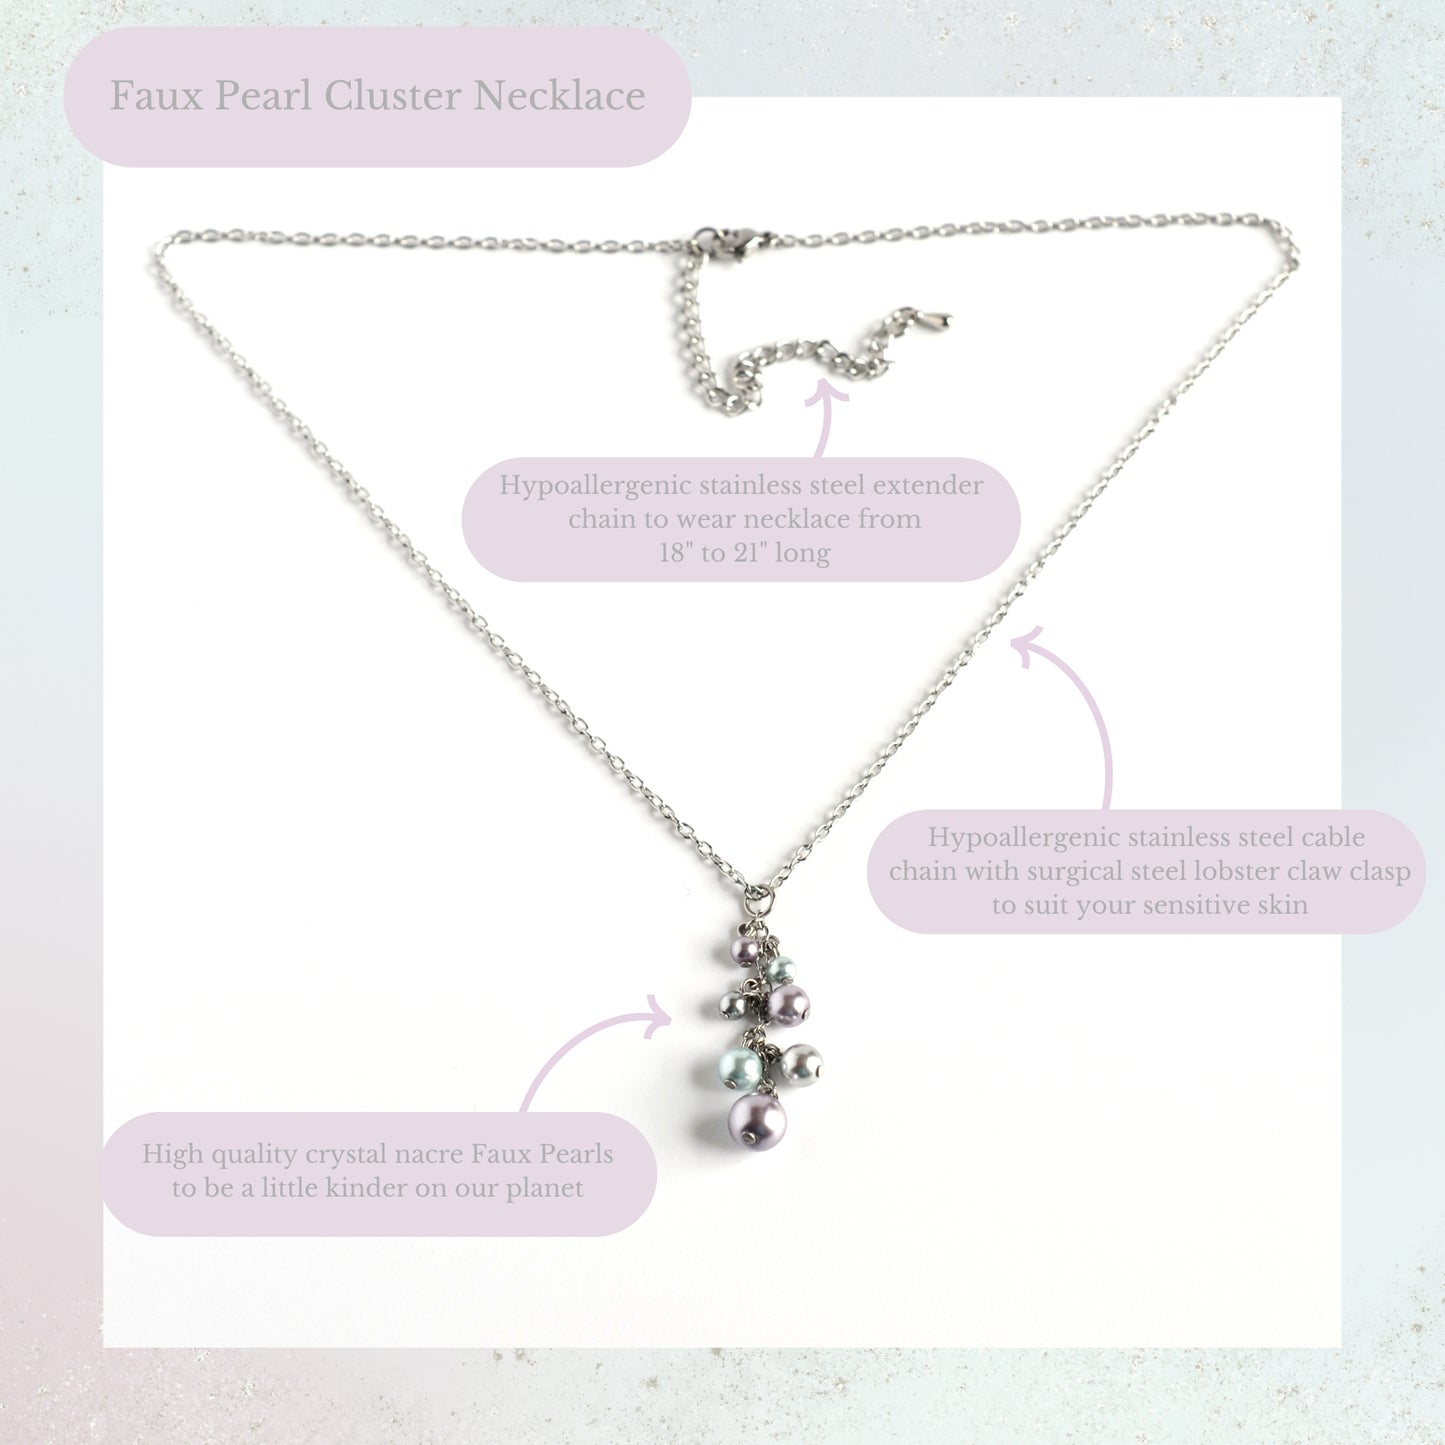 Faux pearl cluster necklace product information graphic